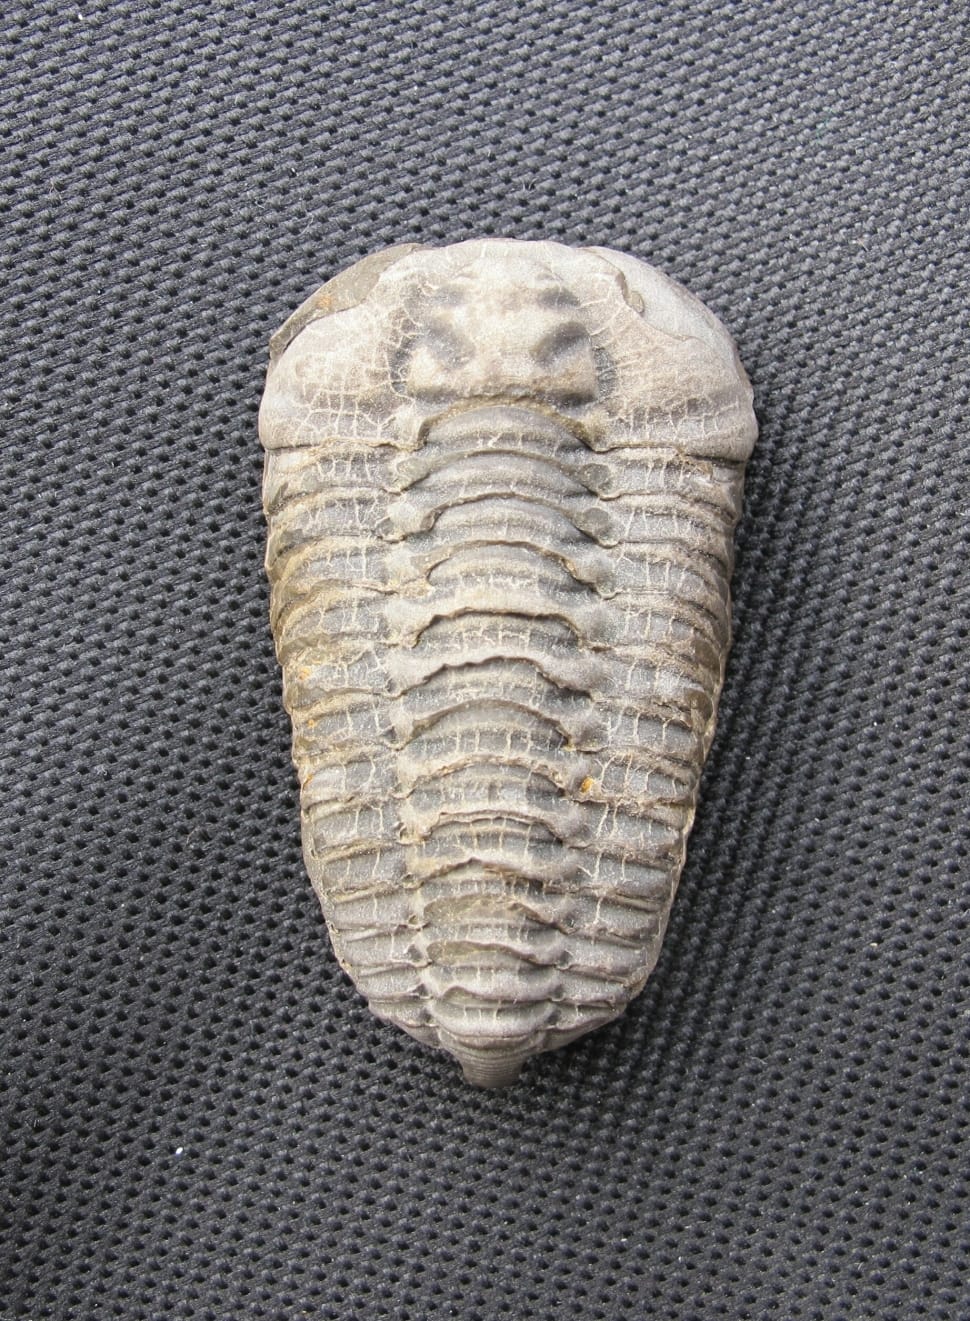 Colpocoryphe Bohemica, Fossil, Trilobite, animal shell, fossil preview